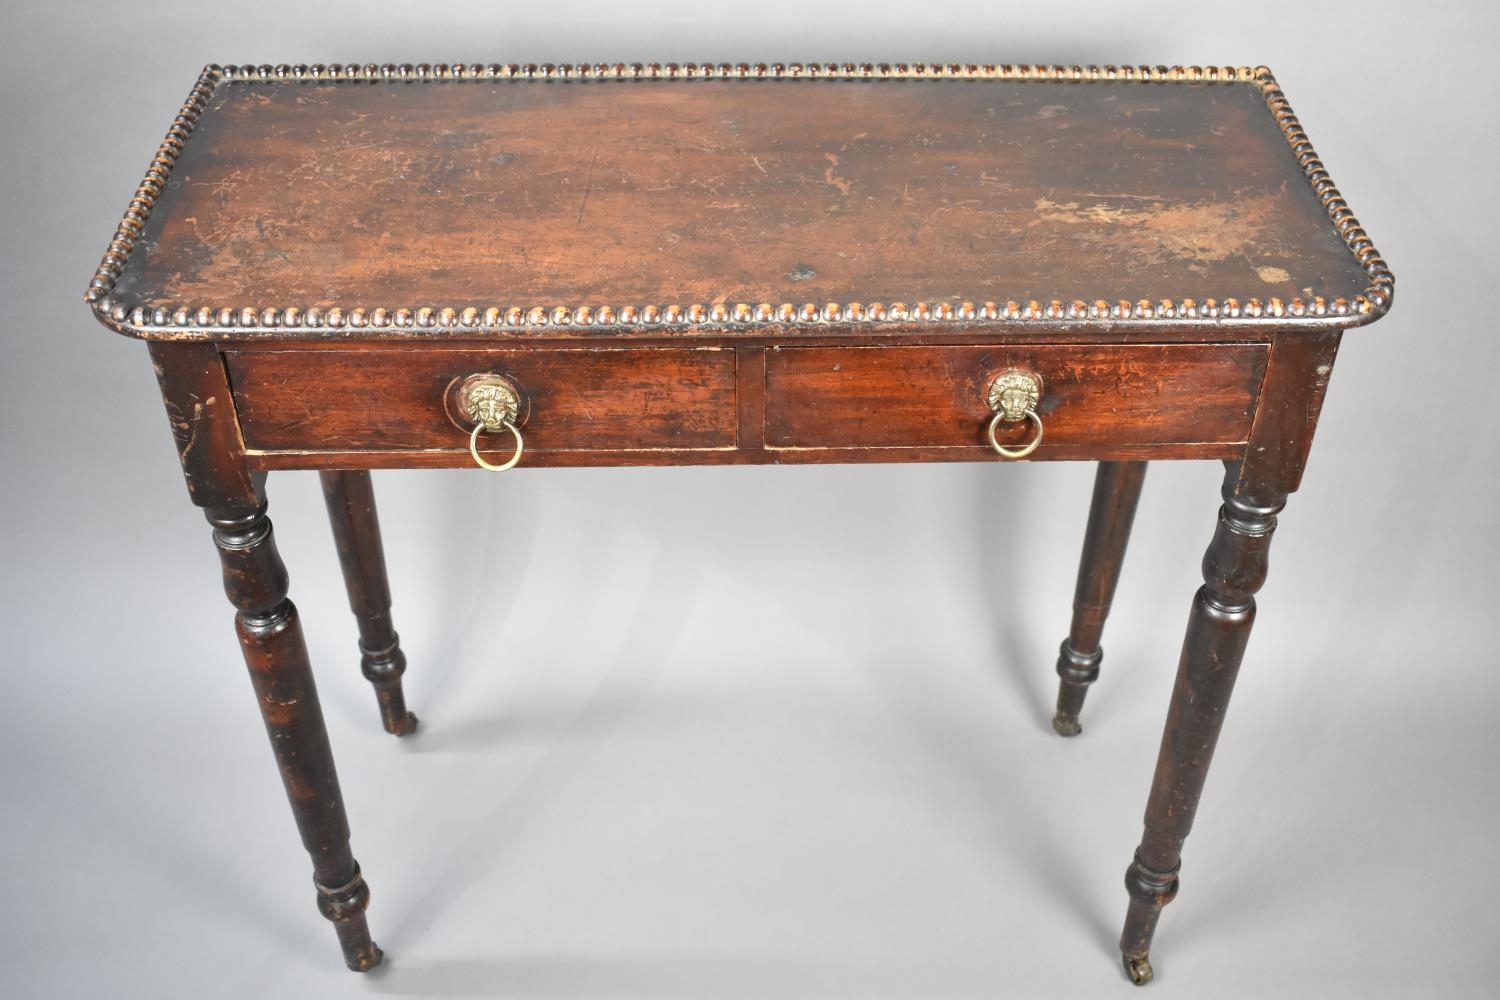 A Late 19th/Early 20th Century Mahogany Side Table with Two Short Drawers Having Lion Mask Ring - Image 2 of 2